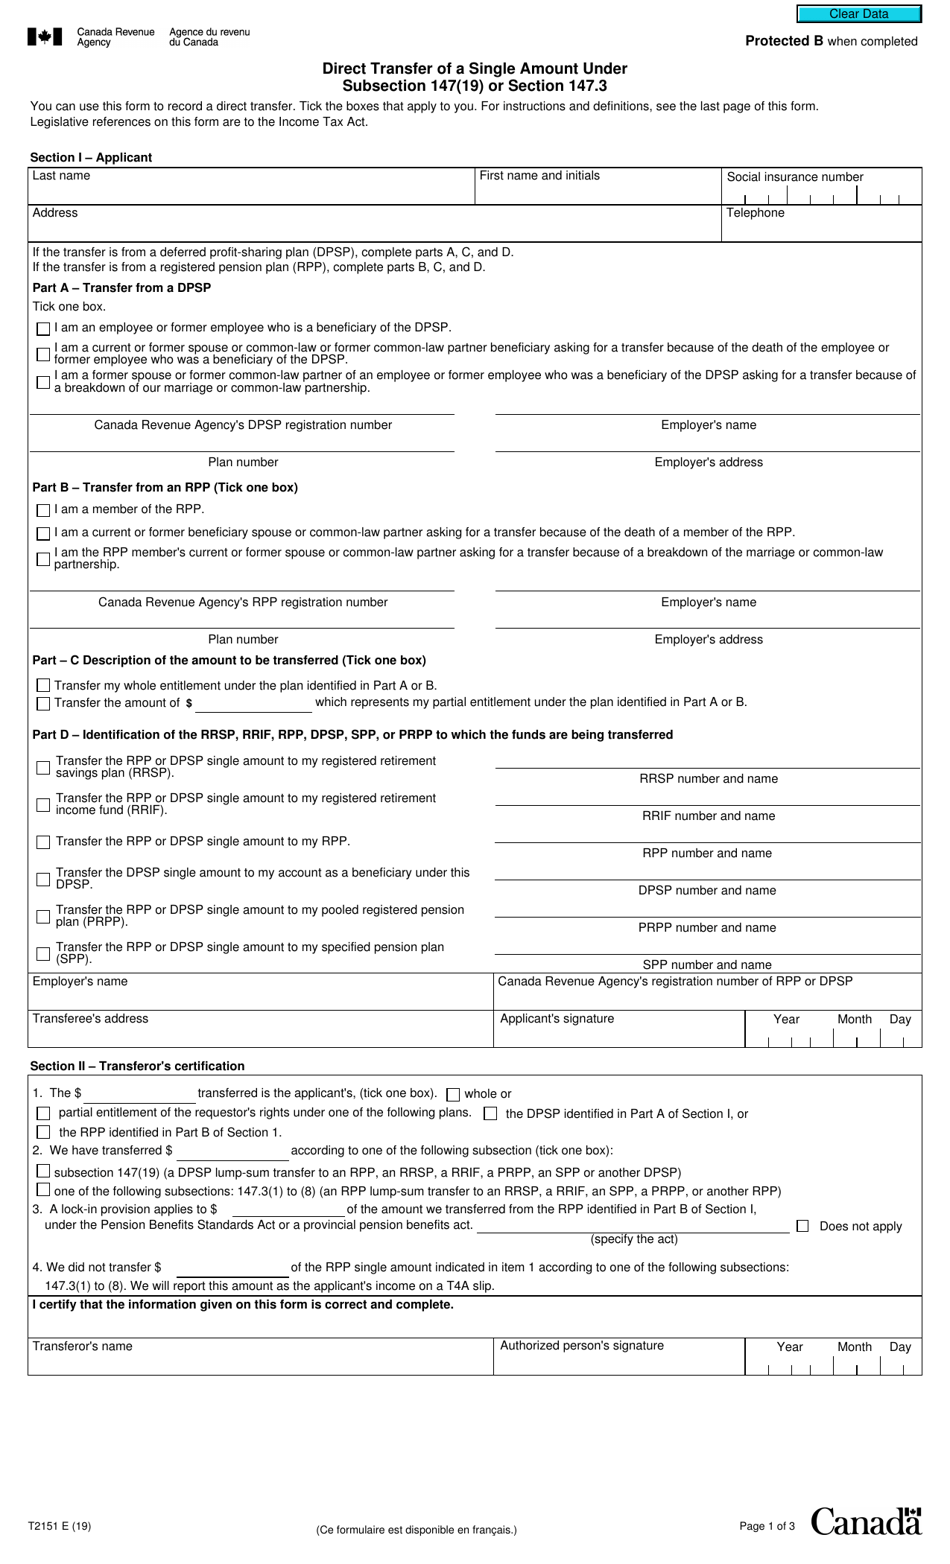 Form T2151 Direct Transfer of a Single Amount Under Subsection 147(19) or Section 147.3 - Canada, Page 1